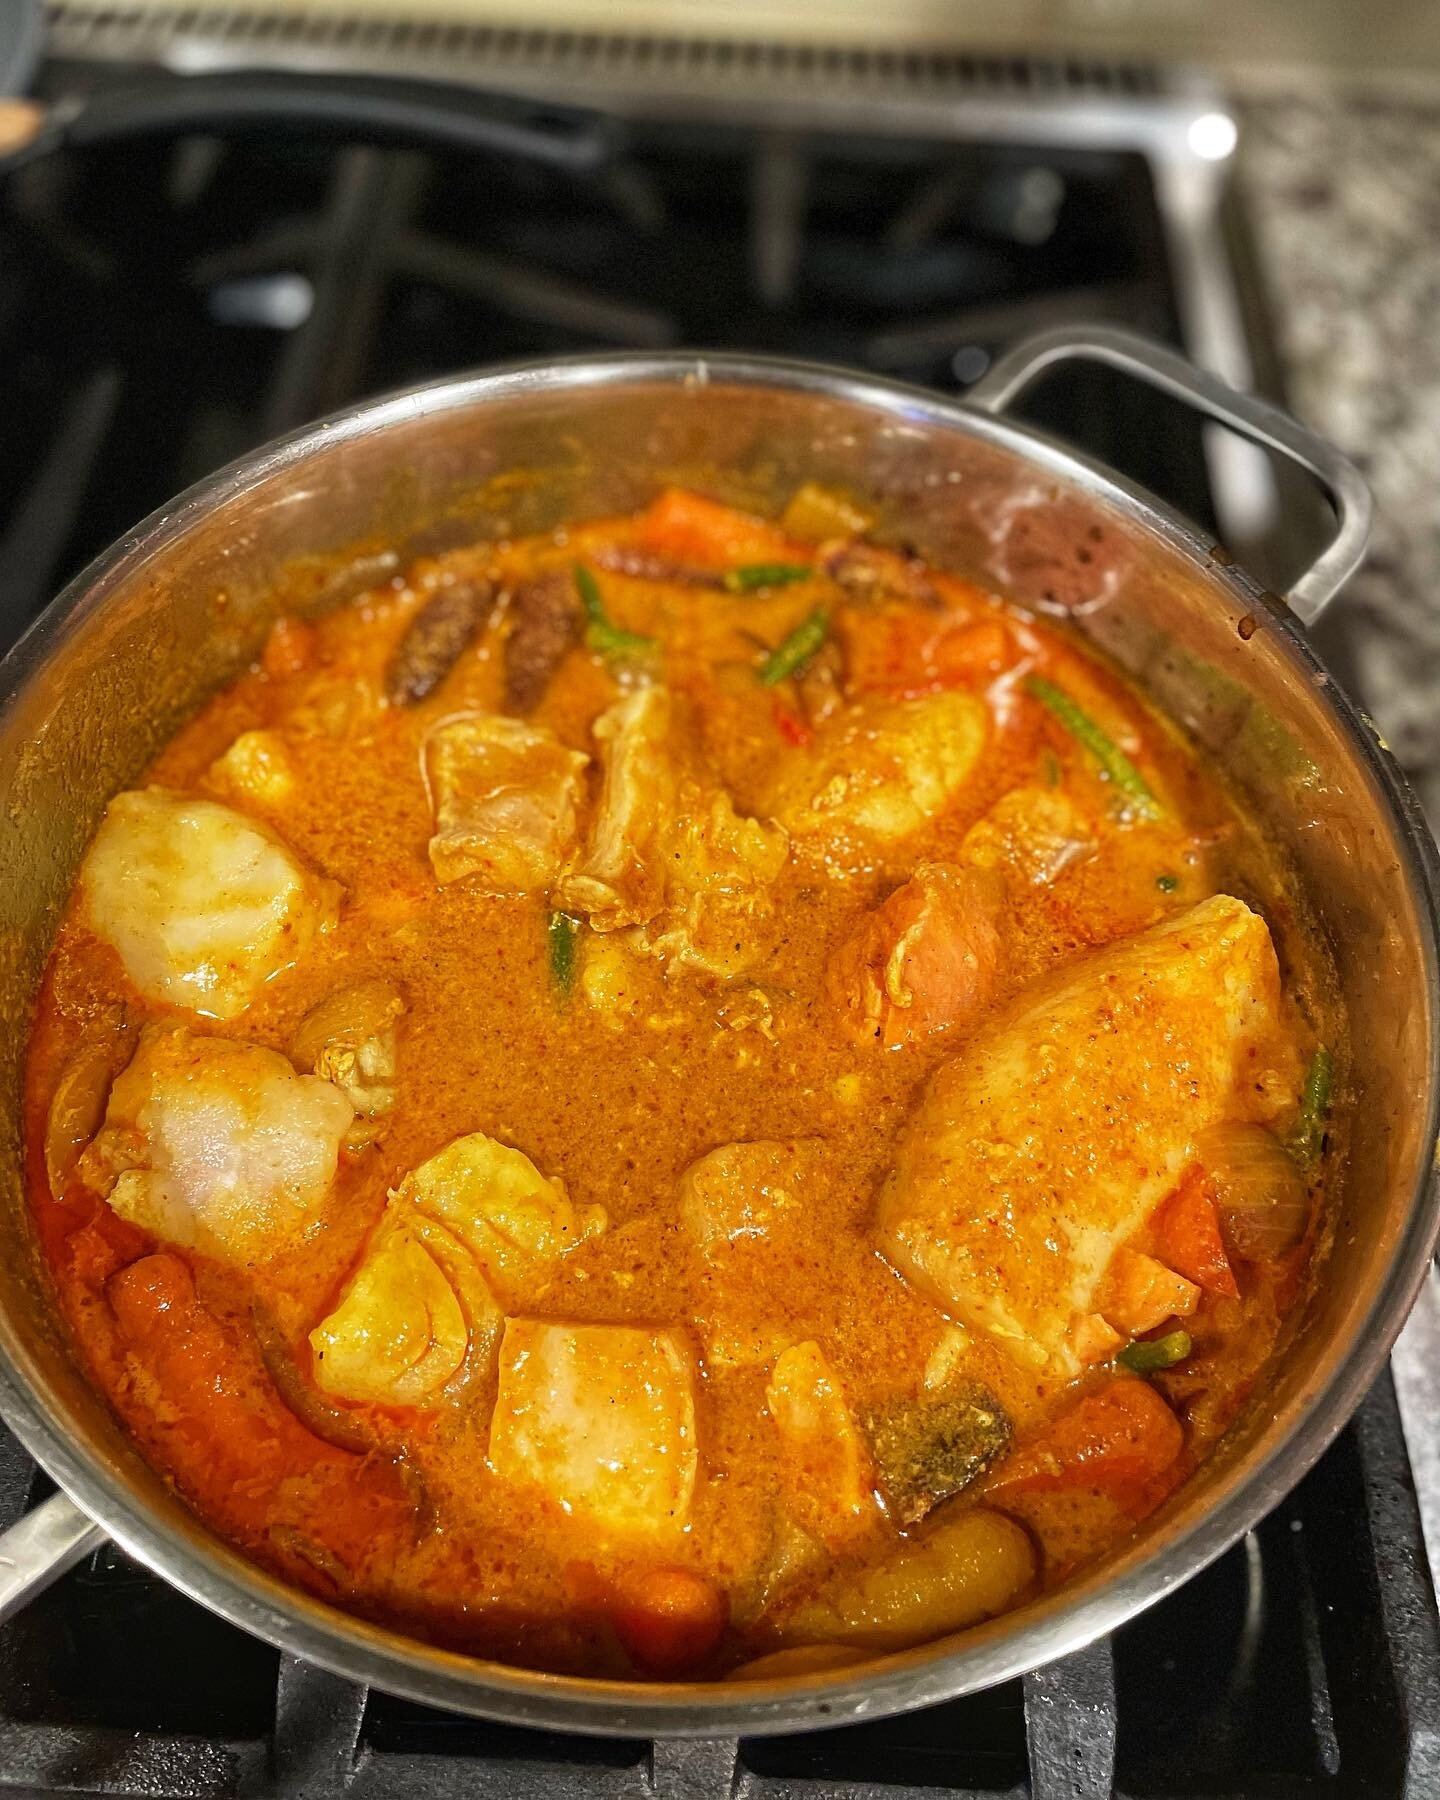 Thai Massamam fish curry - gluten free, super easy to make from curry paste, warm cozy and delicious on a cold winter night.

.

We recently discovered  local chowder fish, leftover bits and bites that the local grocer would put into a container and 